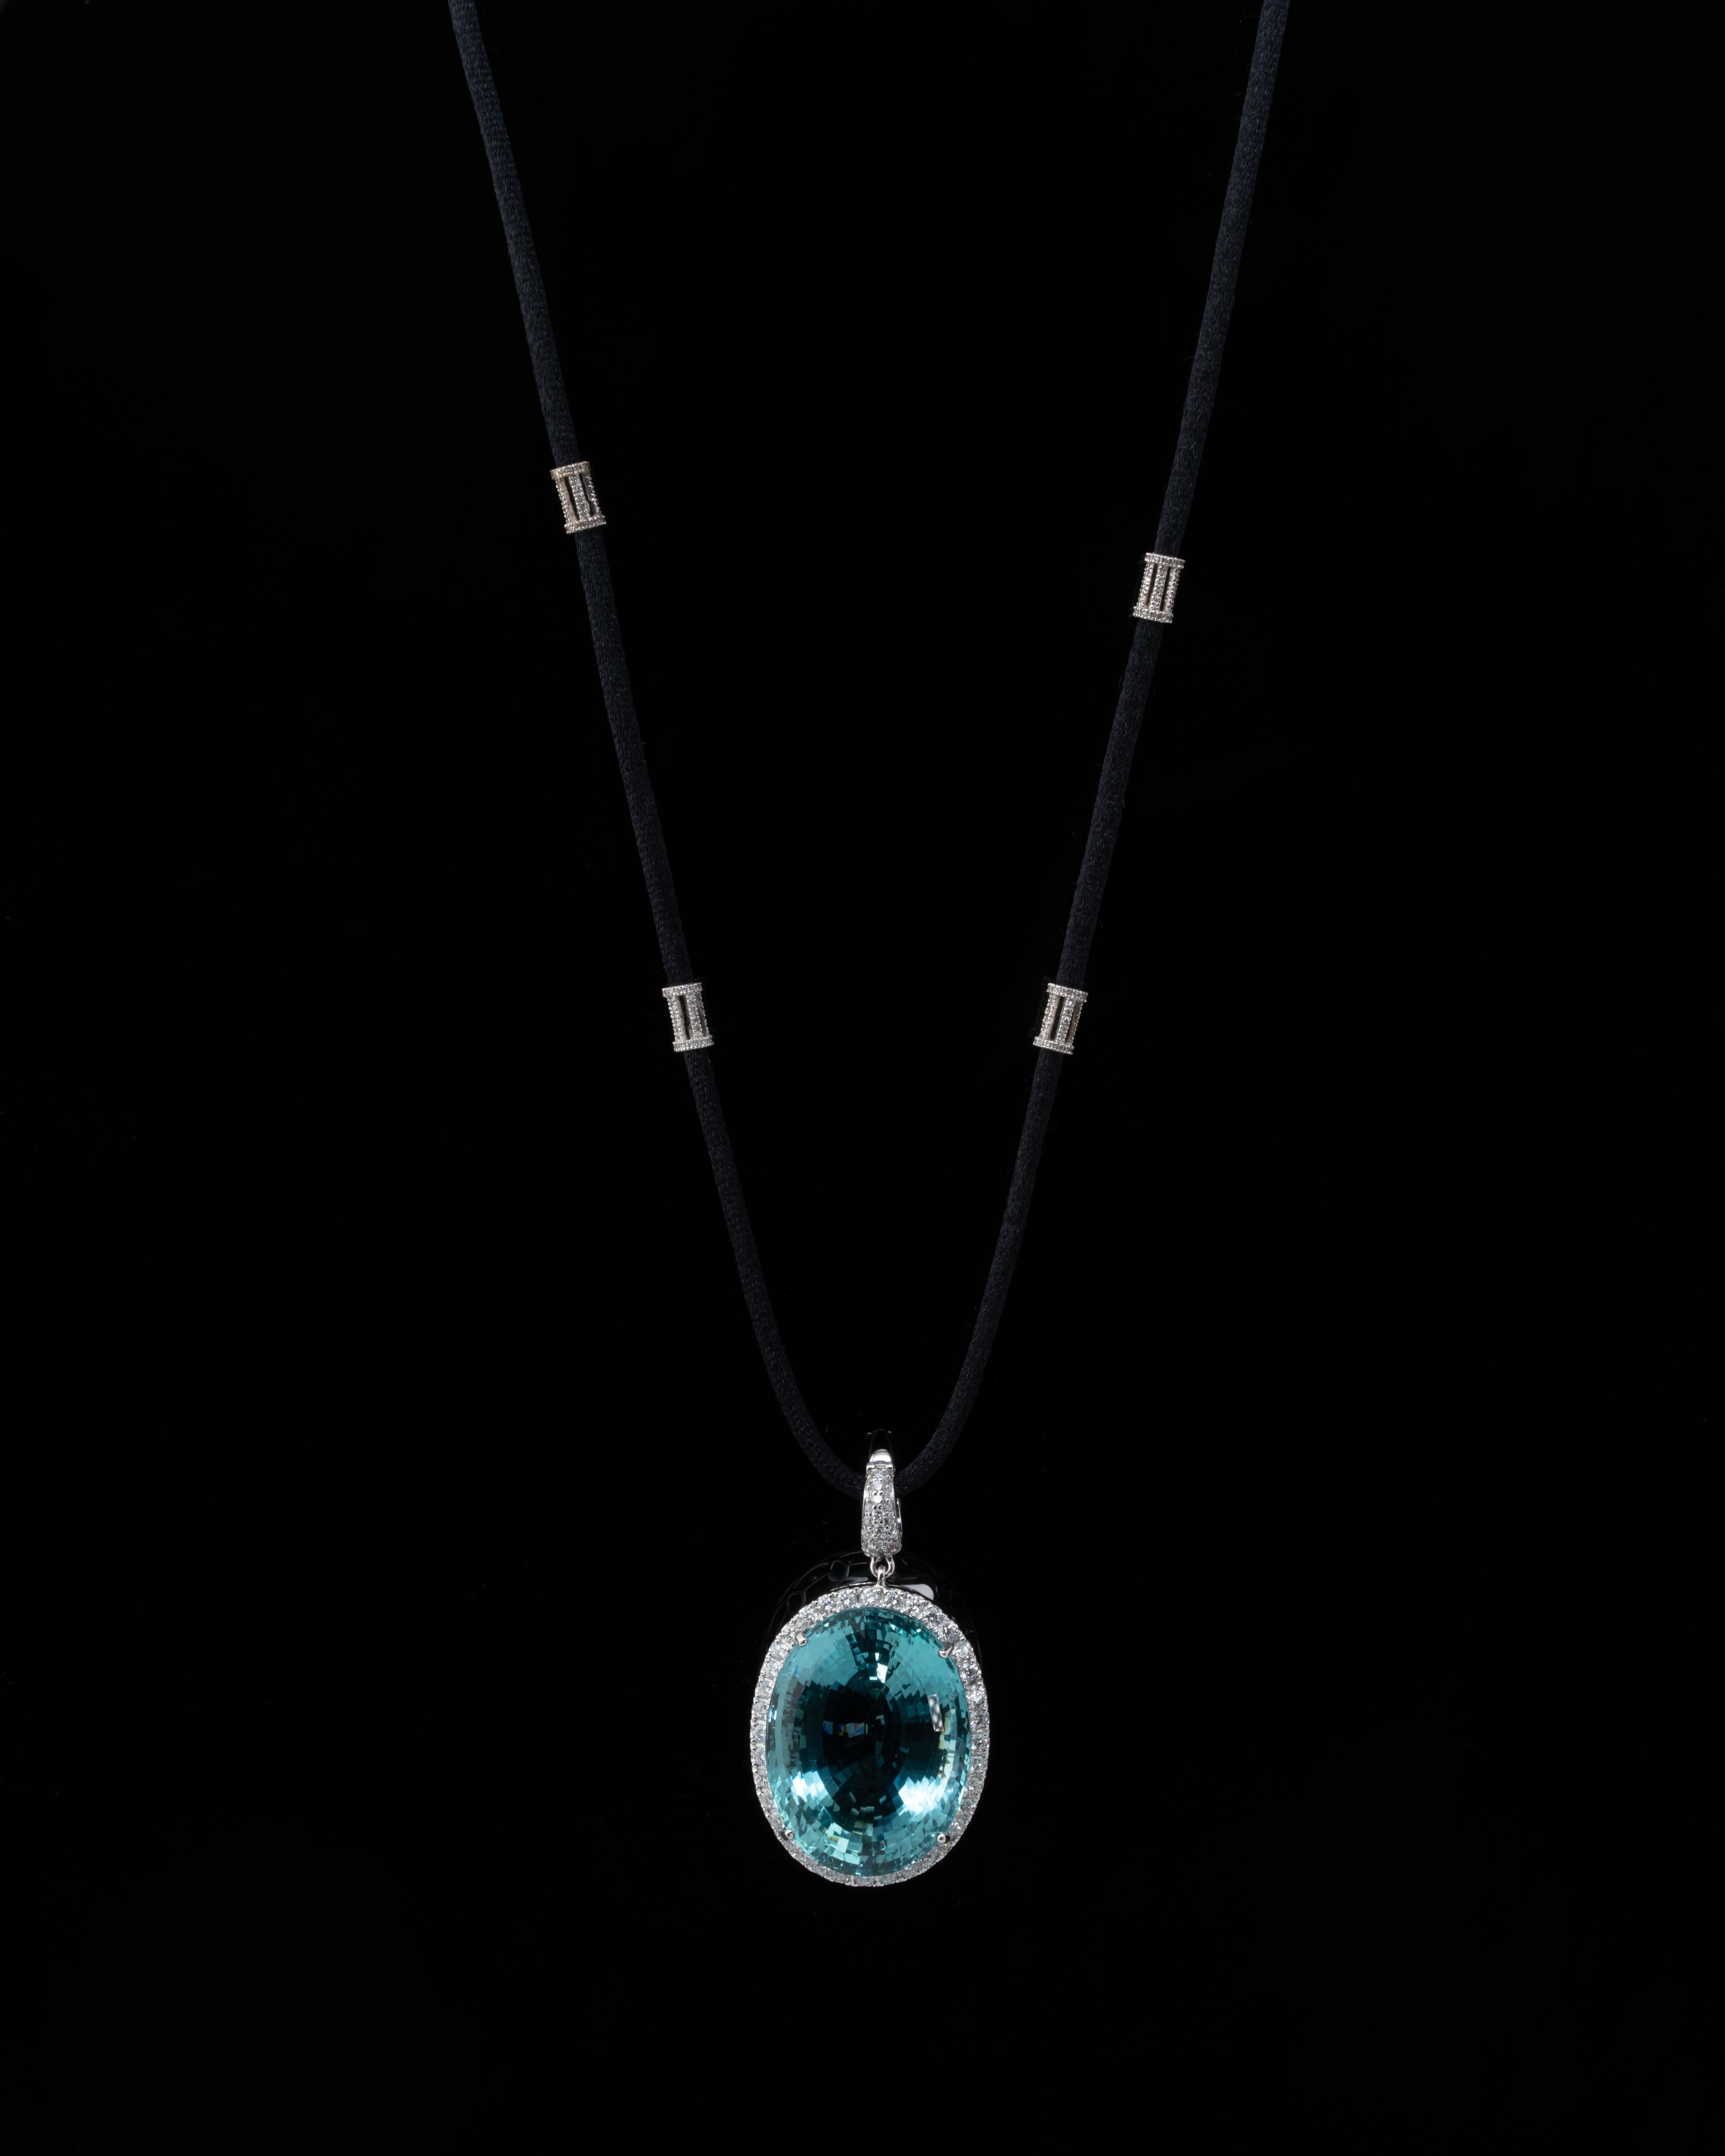 Make a statement when wearing this stunning 83.46ct Aquamarine and Diamond Pendant, set in 18K White Gold. This natural Aquamarine is transparent, with no inclusions at all with an ideal colour and great cut, making it a valuable and collector item.